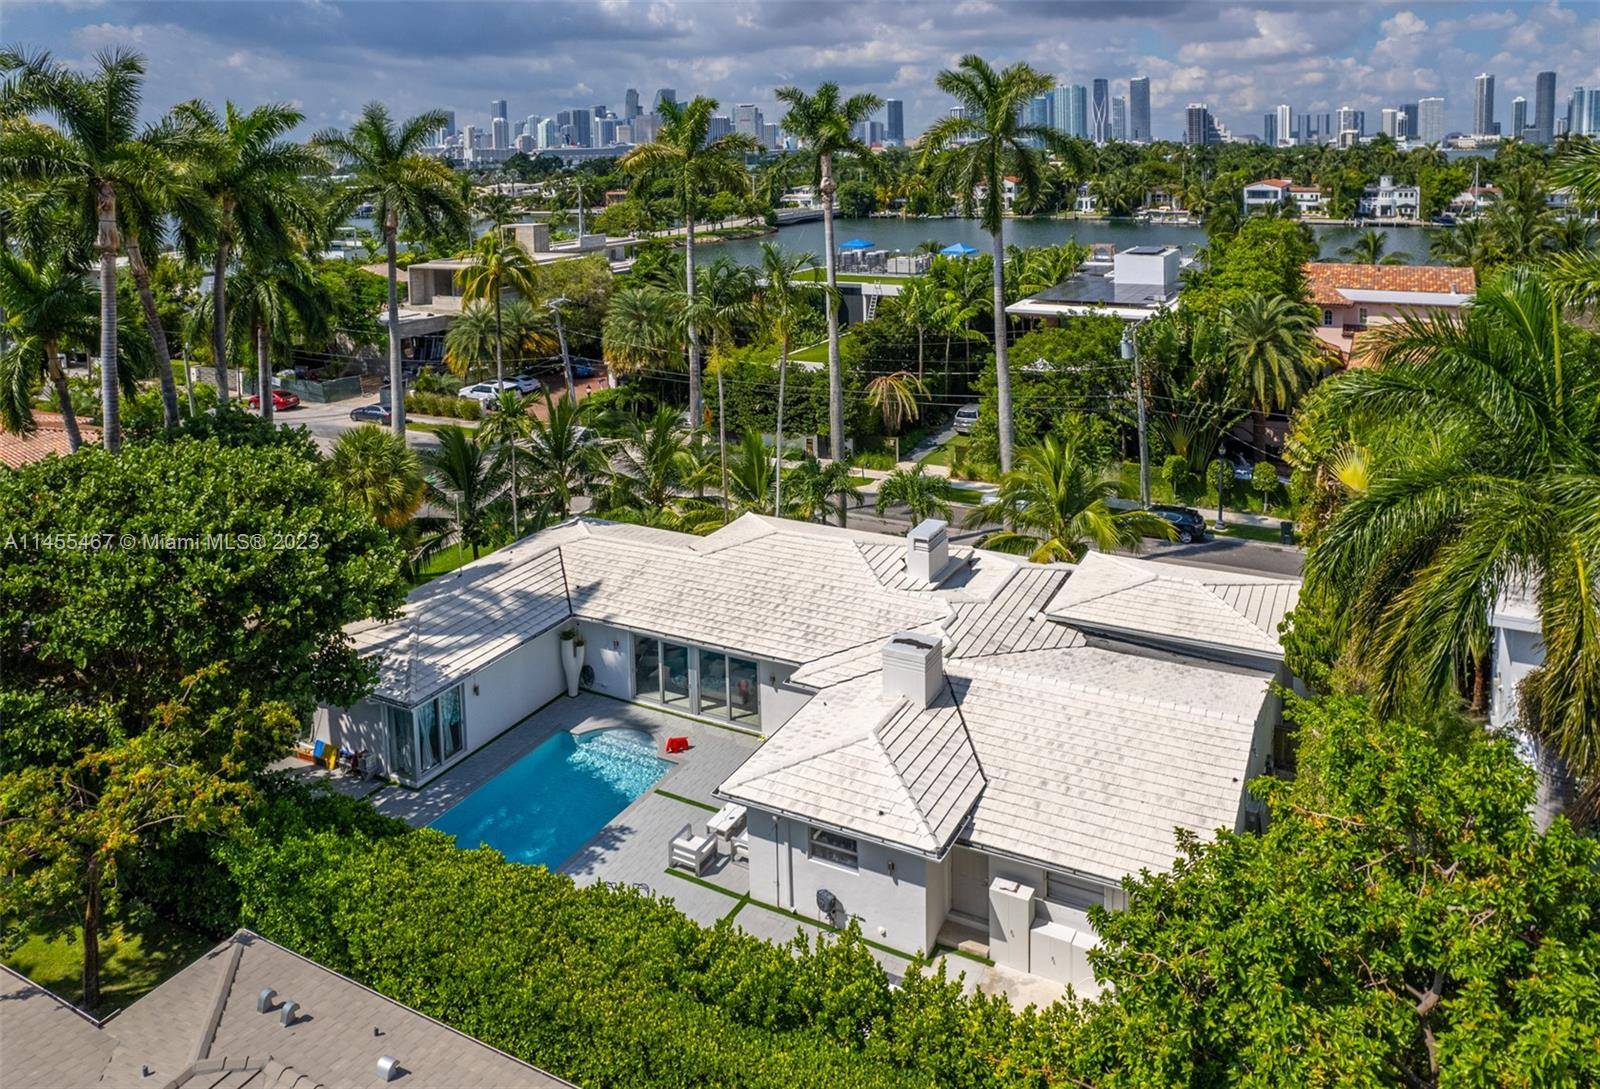 Welcome to this exceptional 4 bed, 4 bath, 3, 800 sqft single family home on an expansive 11, 250 sqft corner lot, a rare find in Miami Beach's Venetian Islands.